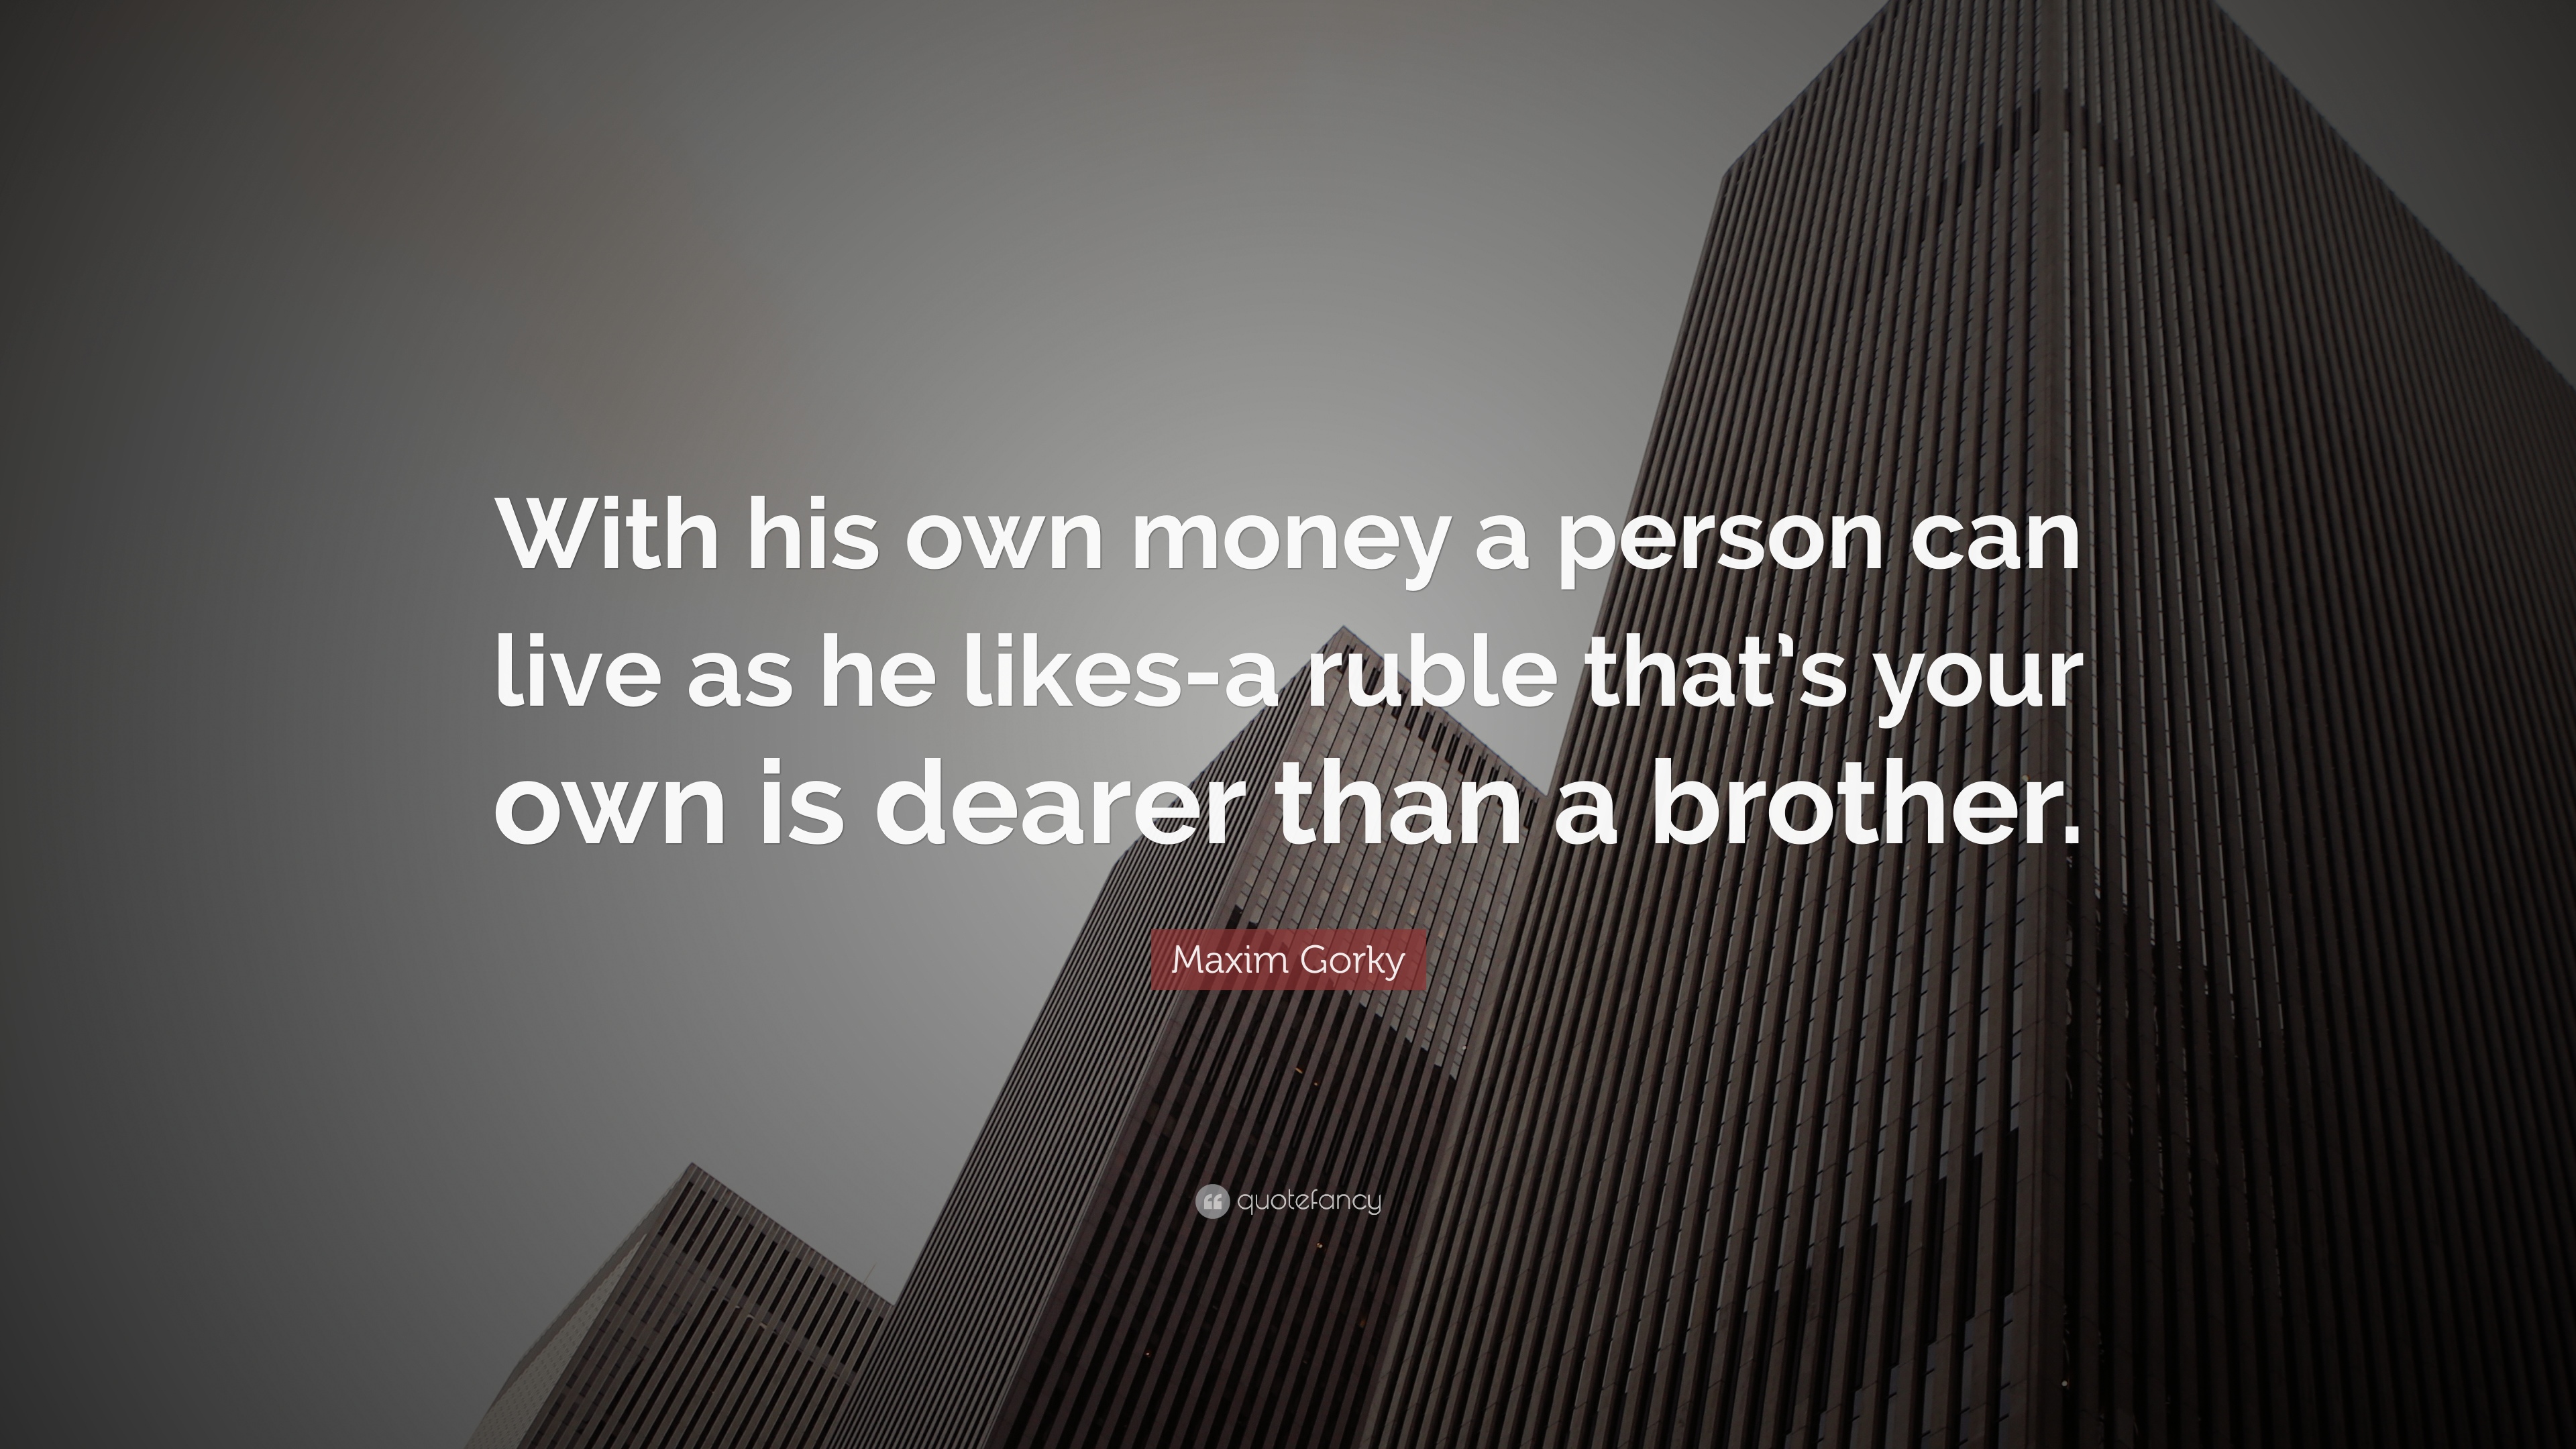 Maxim Gorky Quote: “With his own money a person can live as he likes